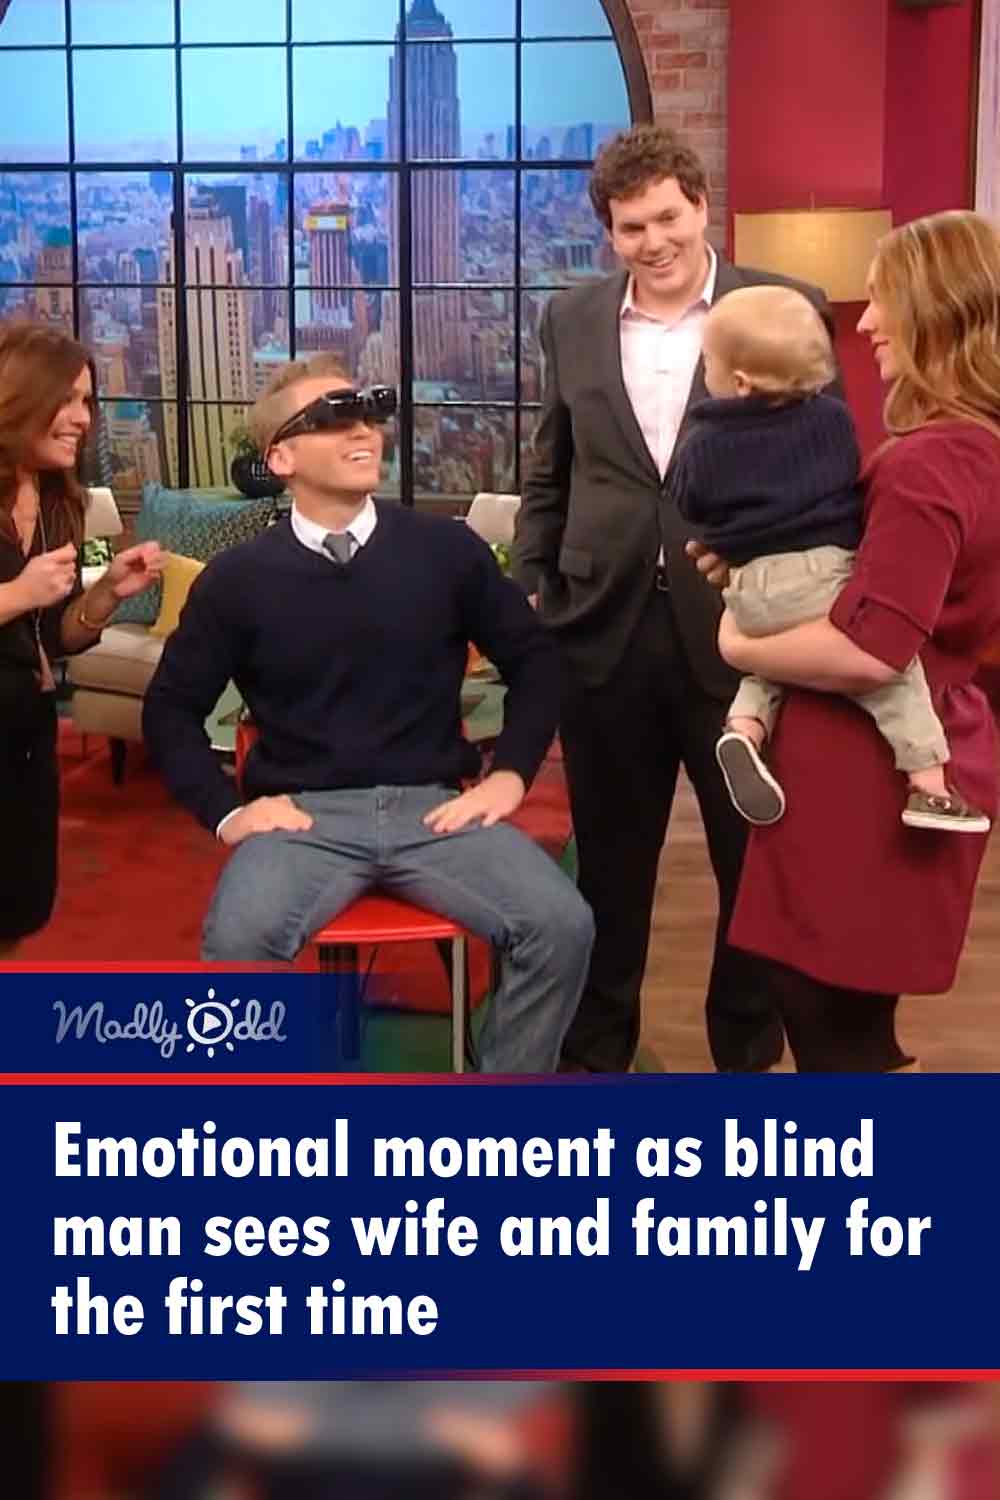 Emotional moment as blind man sees wife and family for the first time